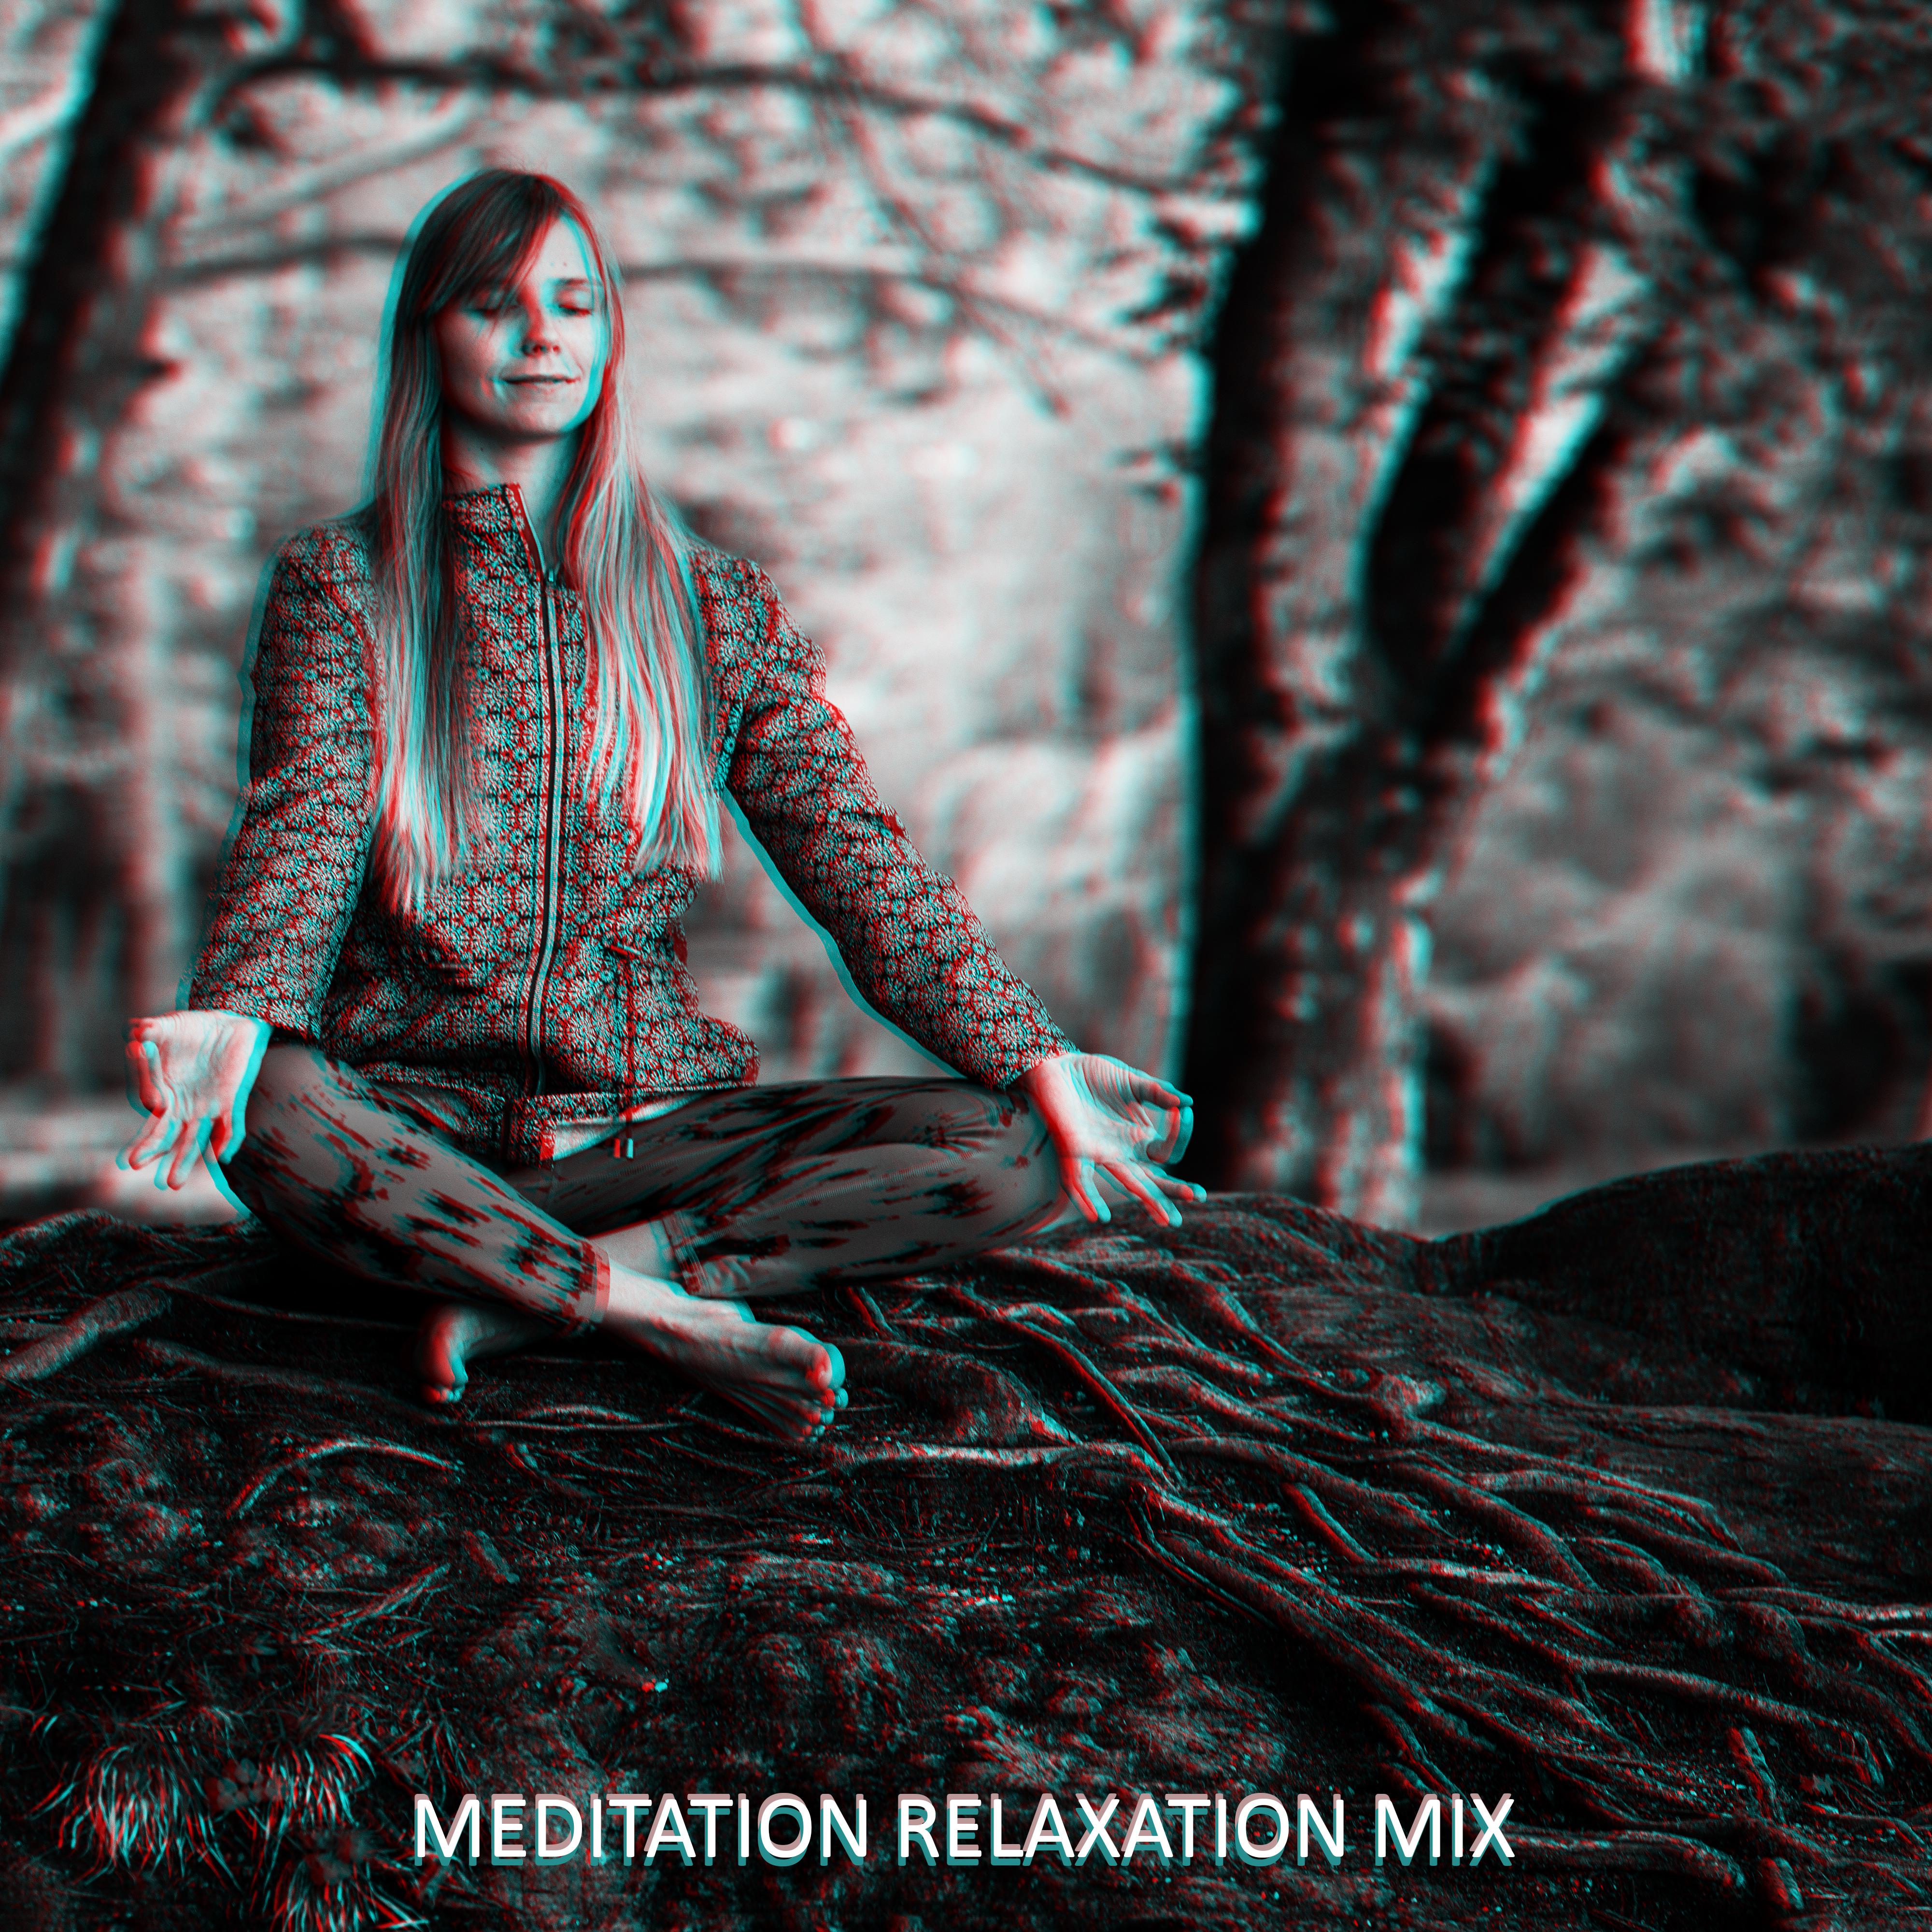 Meditation Relaxation Mix – Yoga Music, Meditation Therapy, Healing Music for Deep Meditation, Inner Focus, Tranquil Peace, Yoga Meditation